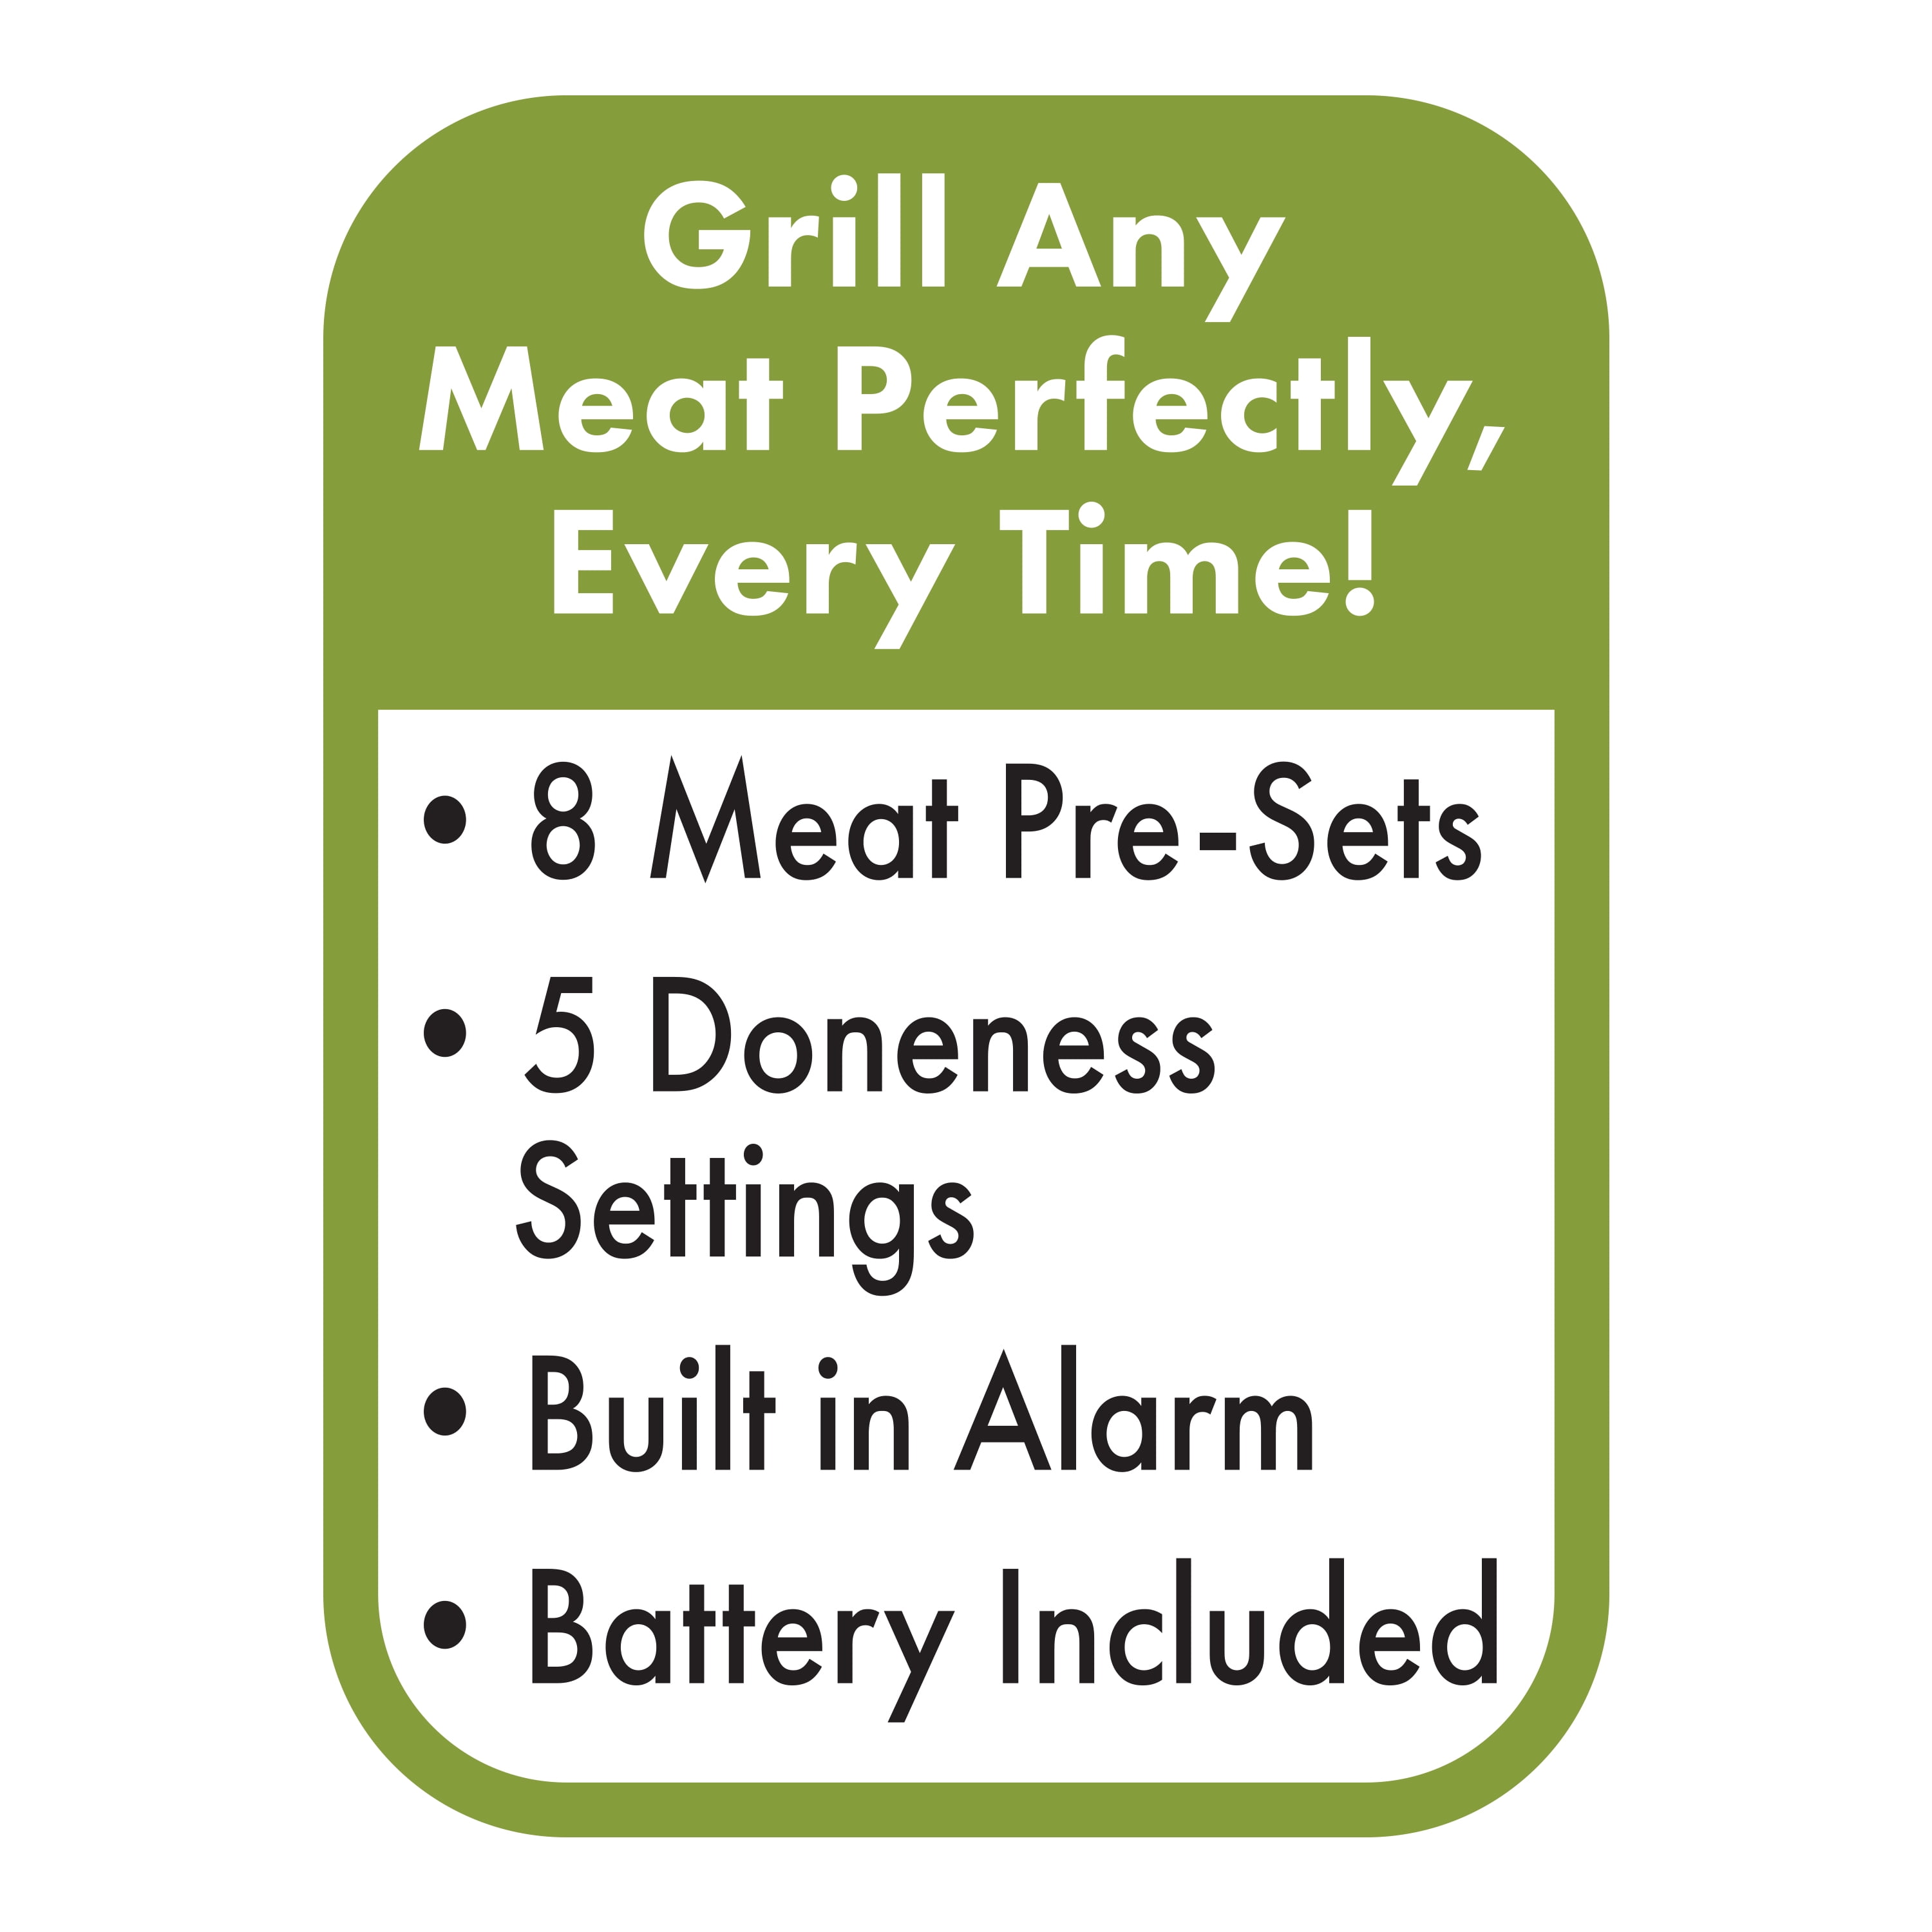 Cuisinart Digital Meat Thermometer